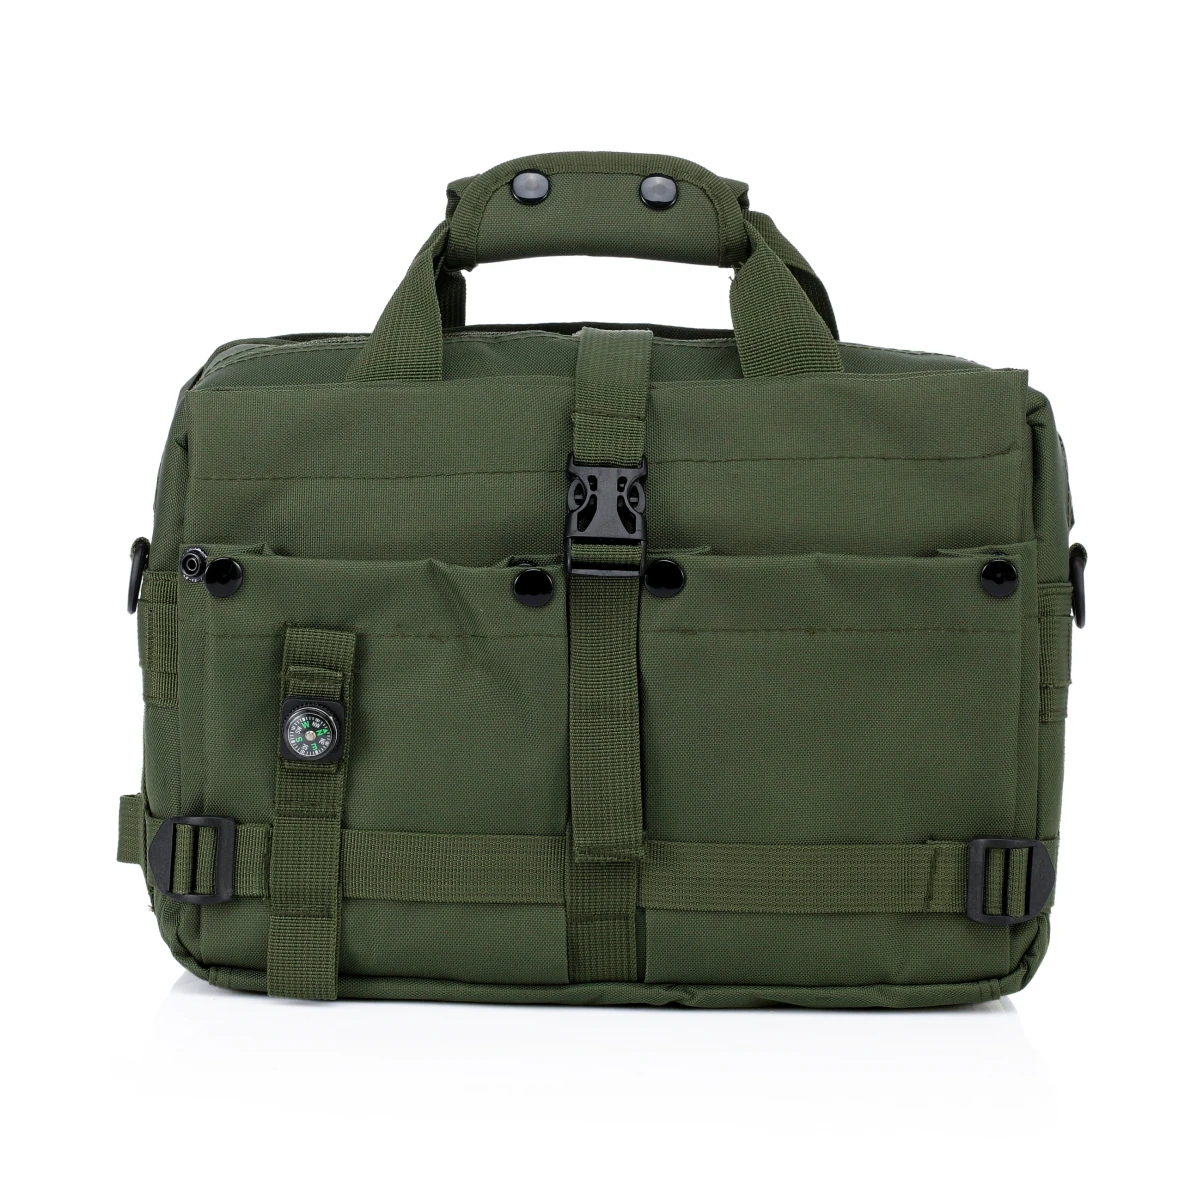 Water Resistant Tactical Style Laptop Shoulder Bag Messenger Bag With Compass